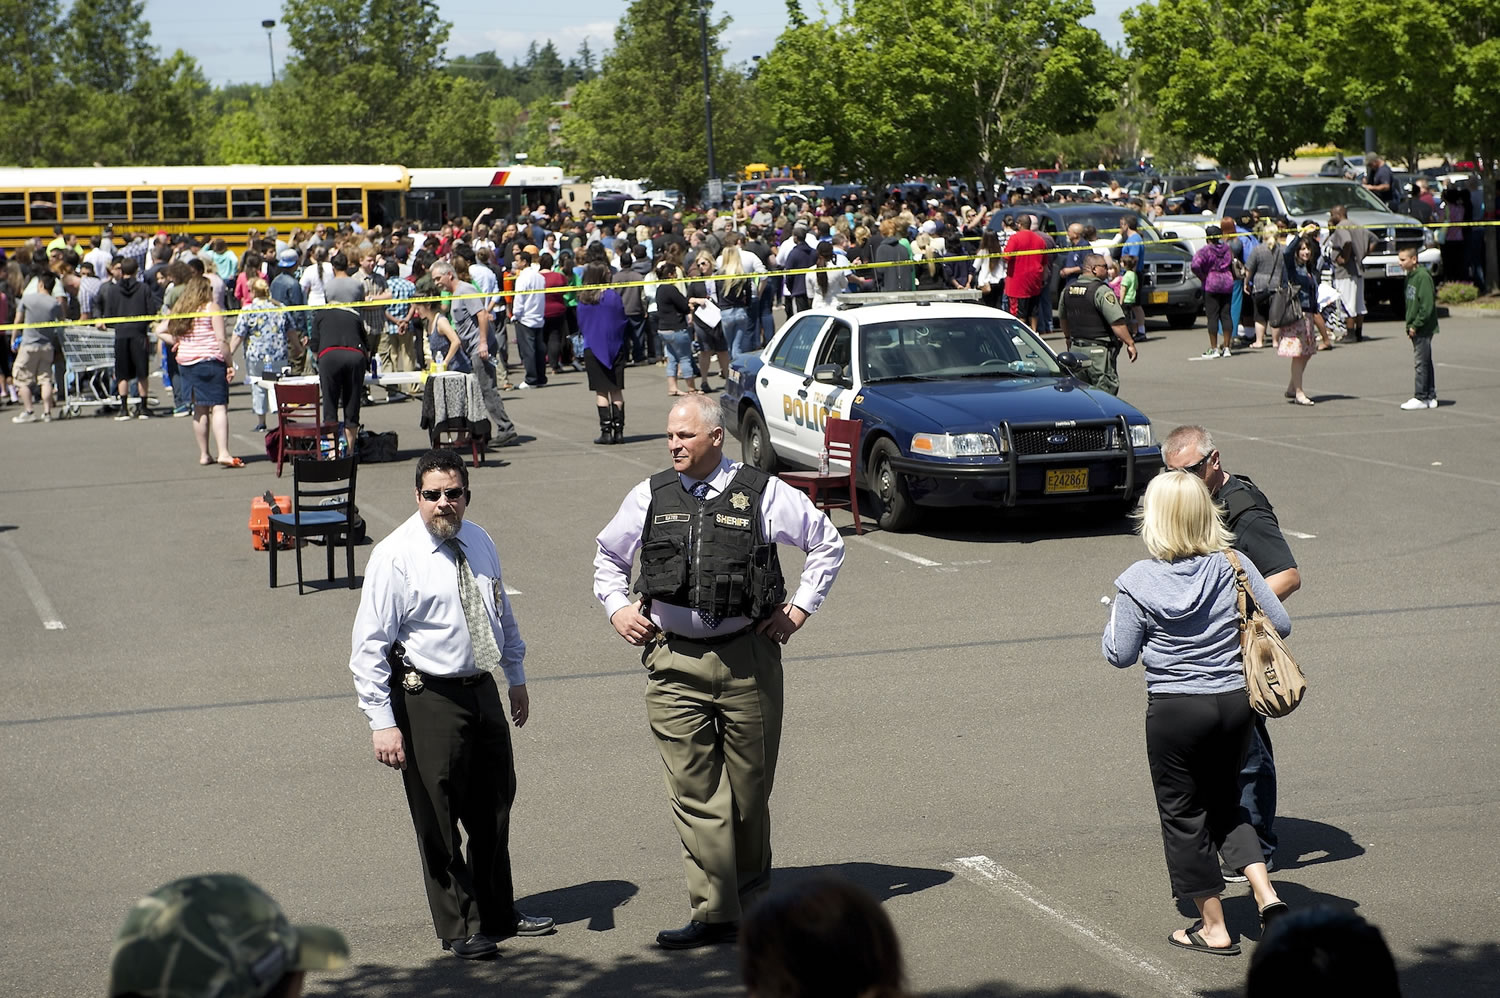 FILE - In this Tuesday, June 10, 2014, file photo, police direct parents to waiting students arriving by bus at a shopping center parking lot in Wood Village, Ore., after a shooting at Reynolds High School, in nearby Troutdale. Police in Washington state are asking the public to stop tweeting during shootings and manhunts to avoid accidentally telling the bad guys what officers are doing. Two recent incidents led the Washington State Patrol to organize the &quot;TweetSmart&quot; campaign: the search for a gunman in Canada after three officers were killed and the shooting at Reynolds High School.